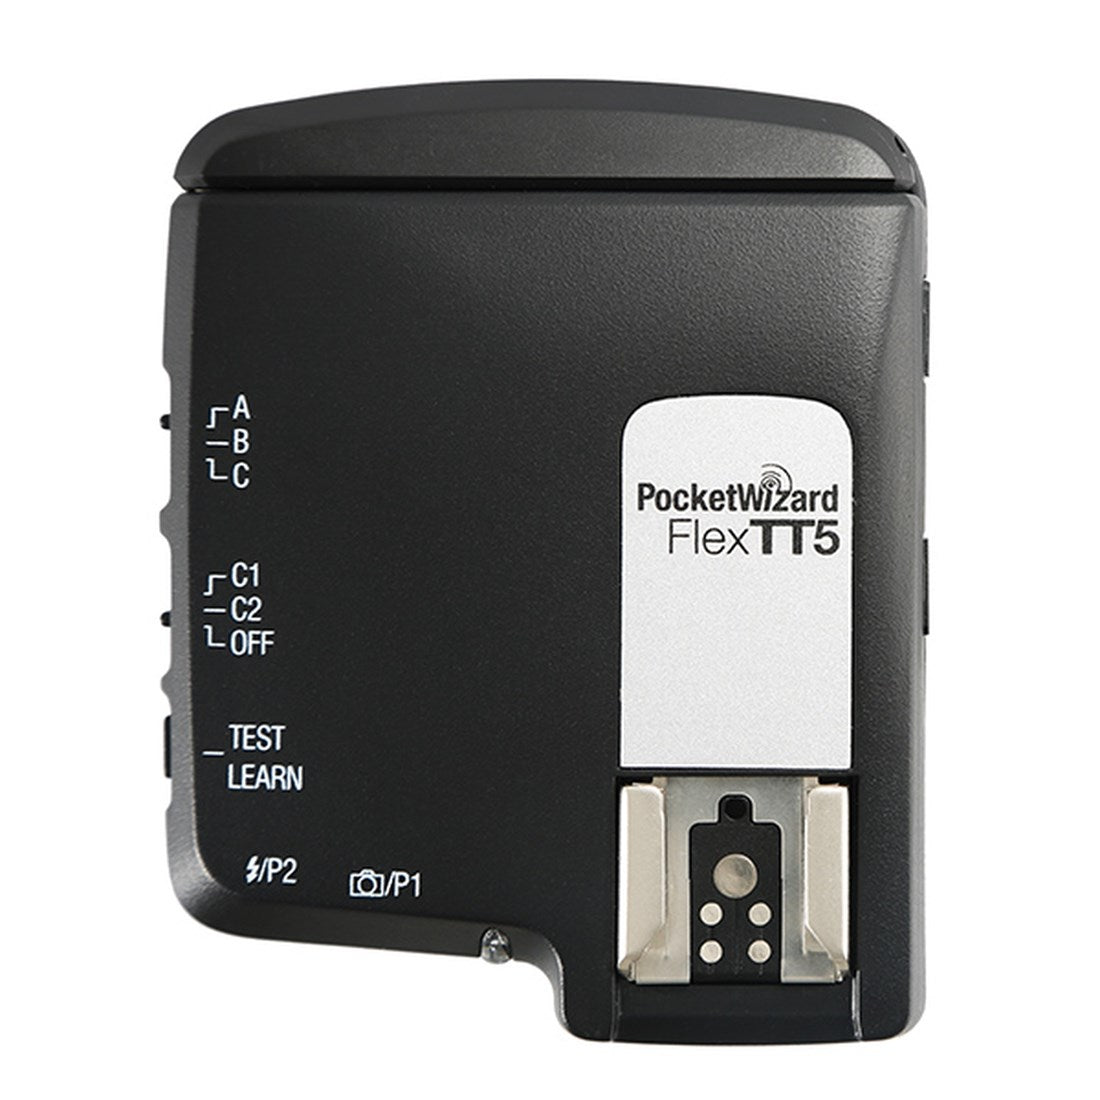 Product Image of Clearance PocketWizard FlexTT5 Transceiver for Canon CLEARANCE1342